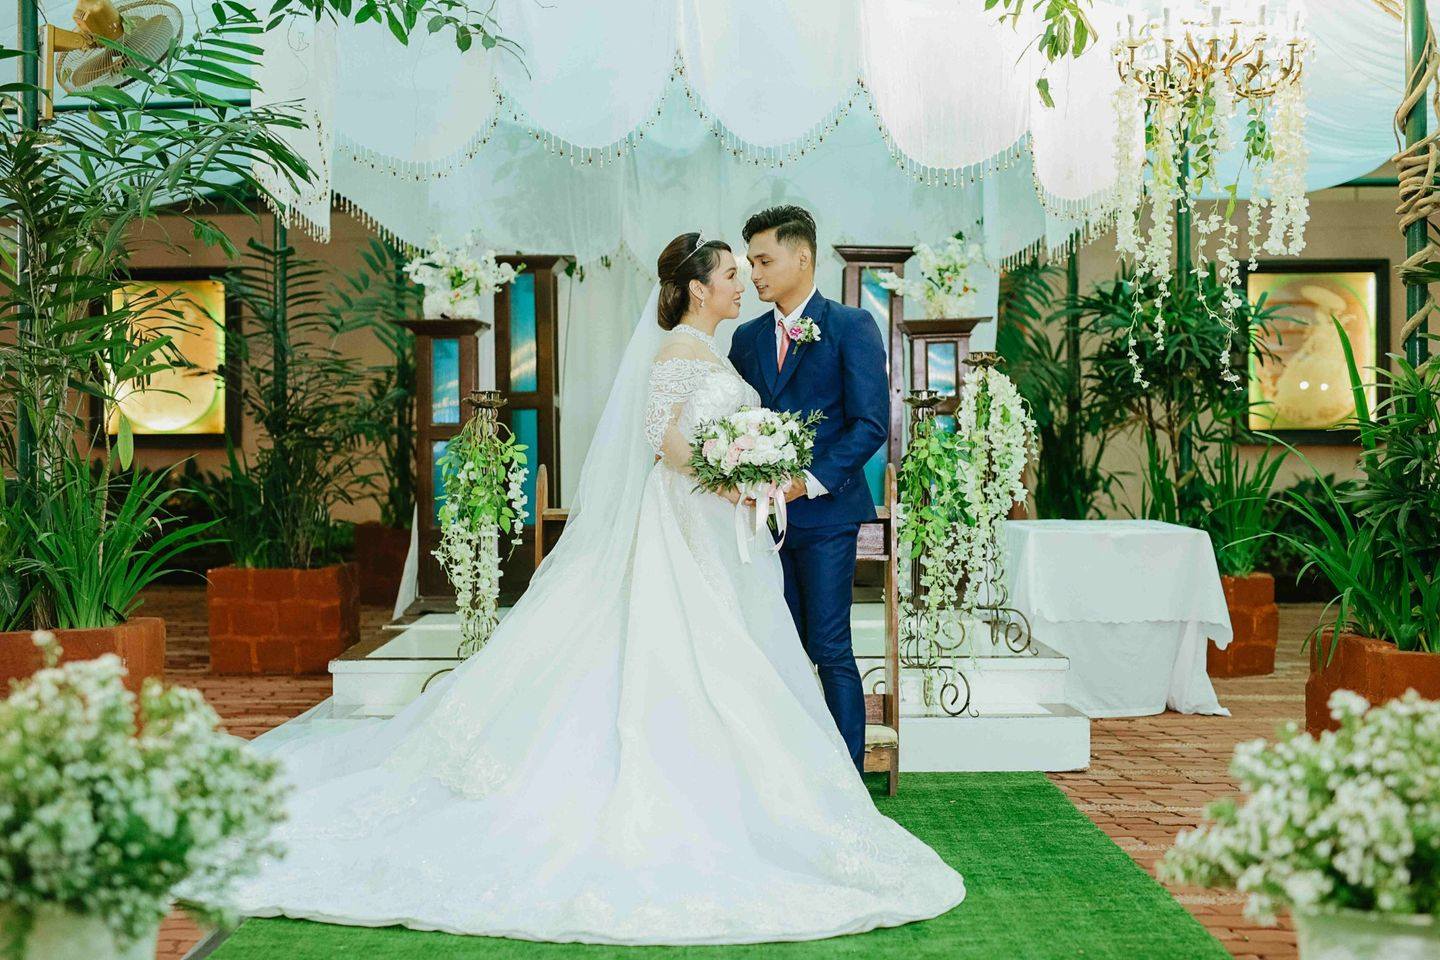 Hassle-free wedding venue in Tagaytay with couple